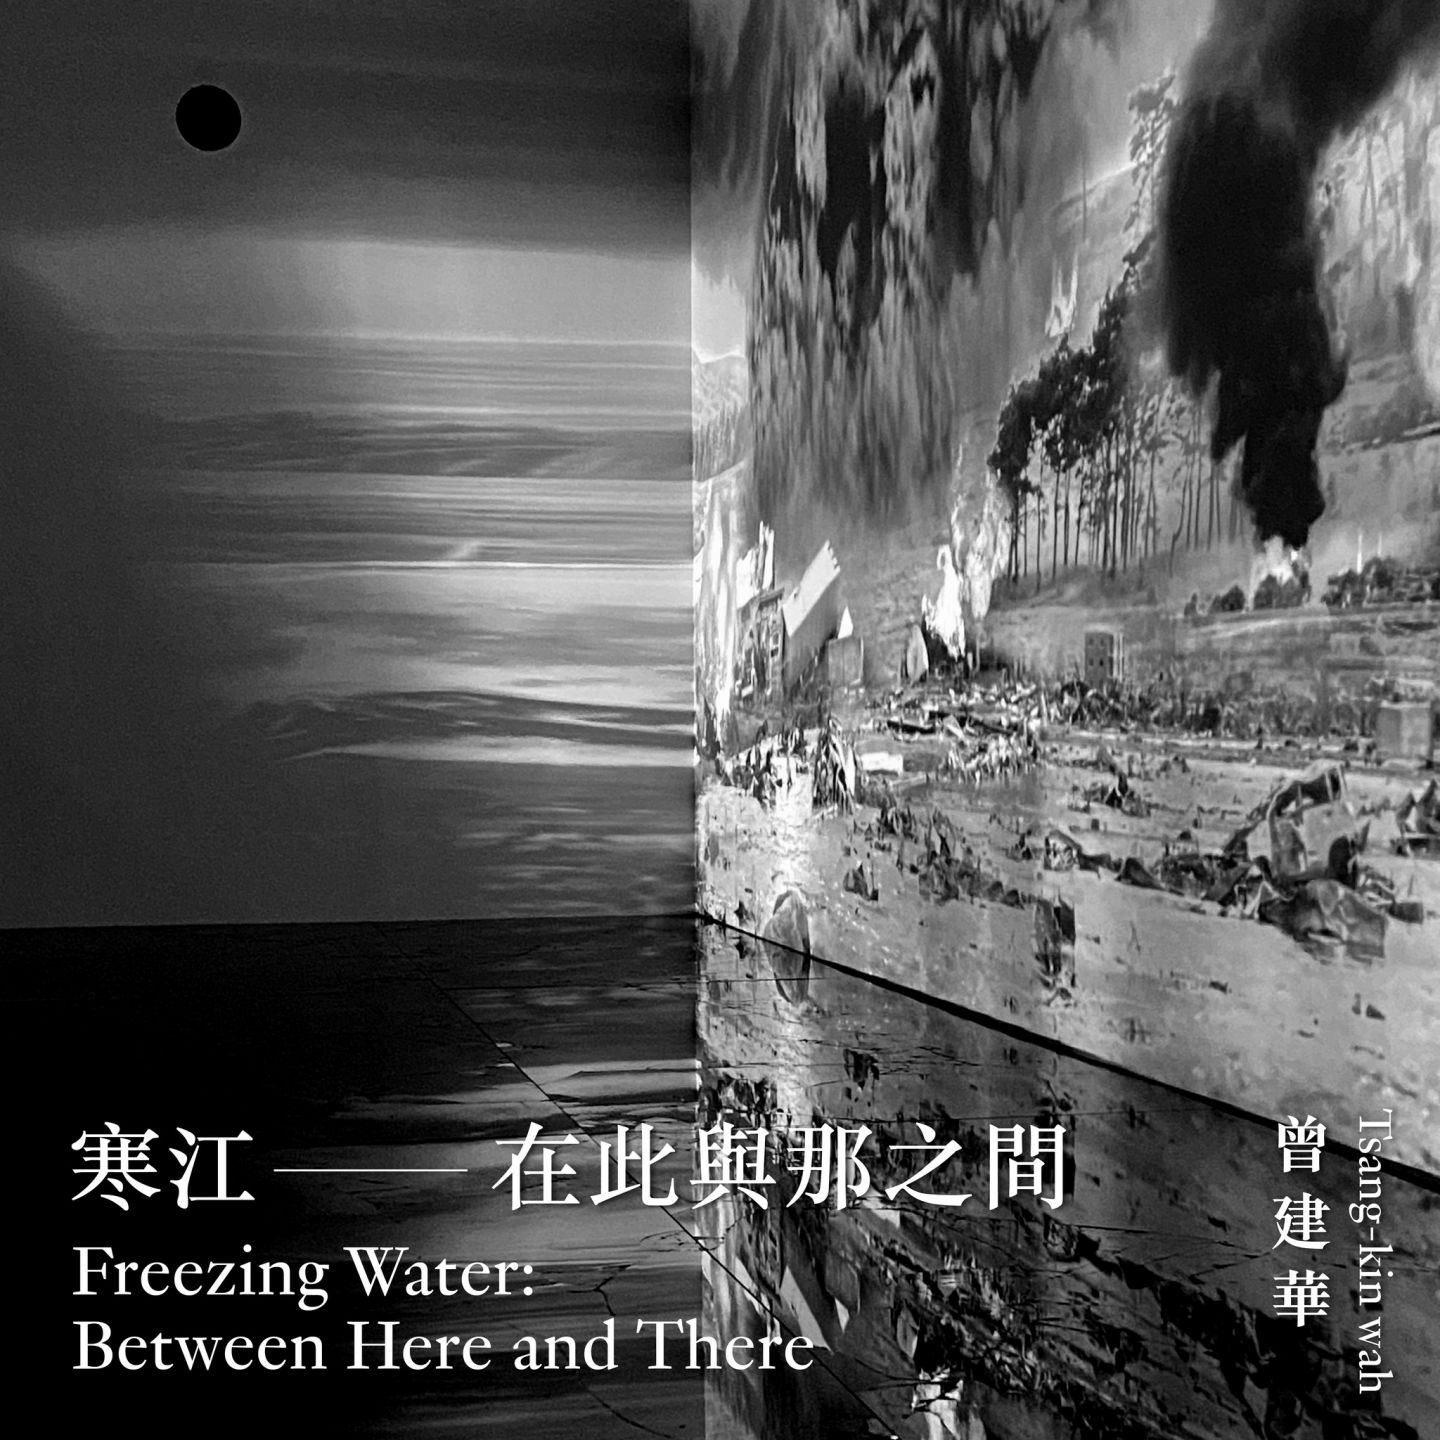 Tsang Kin-wah Freezing Water: Between Here and There A Site-specific Art Installation